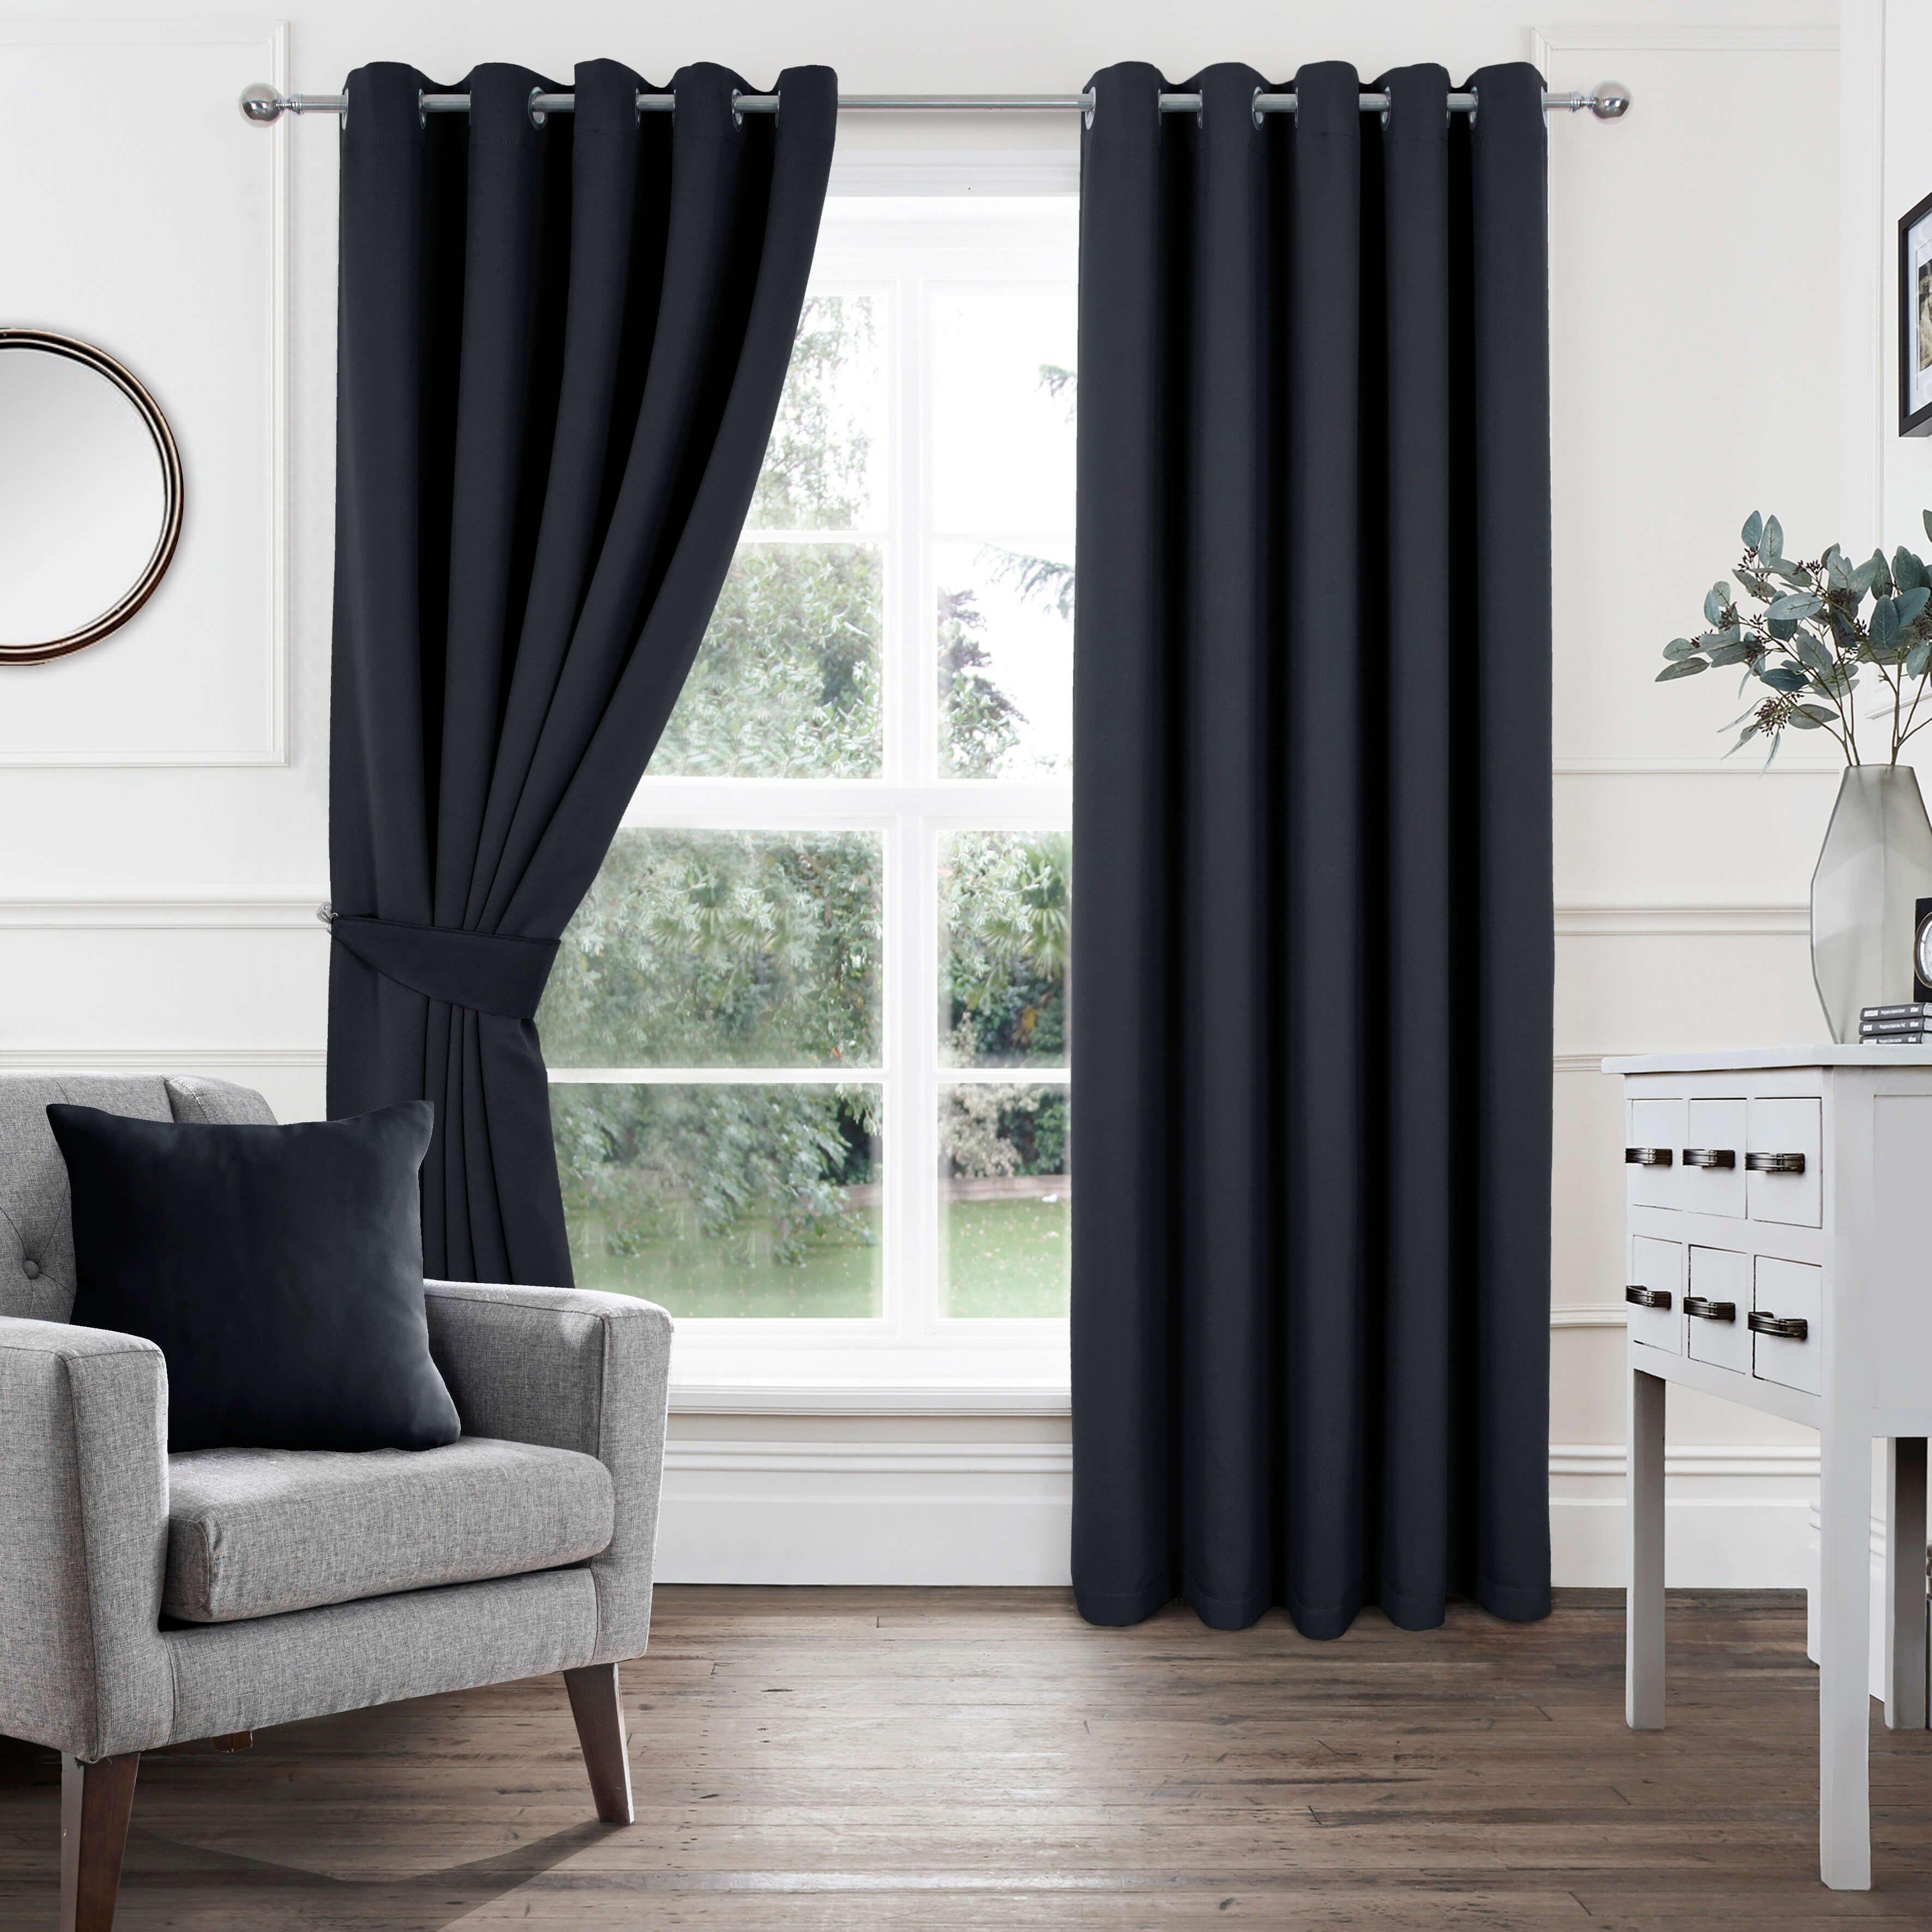 Woven Blockout Eyelet Curtains pair - image 1